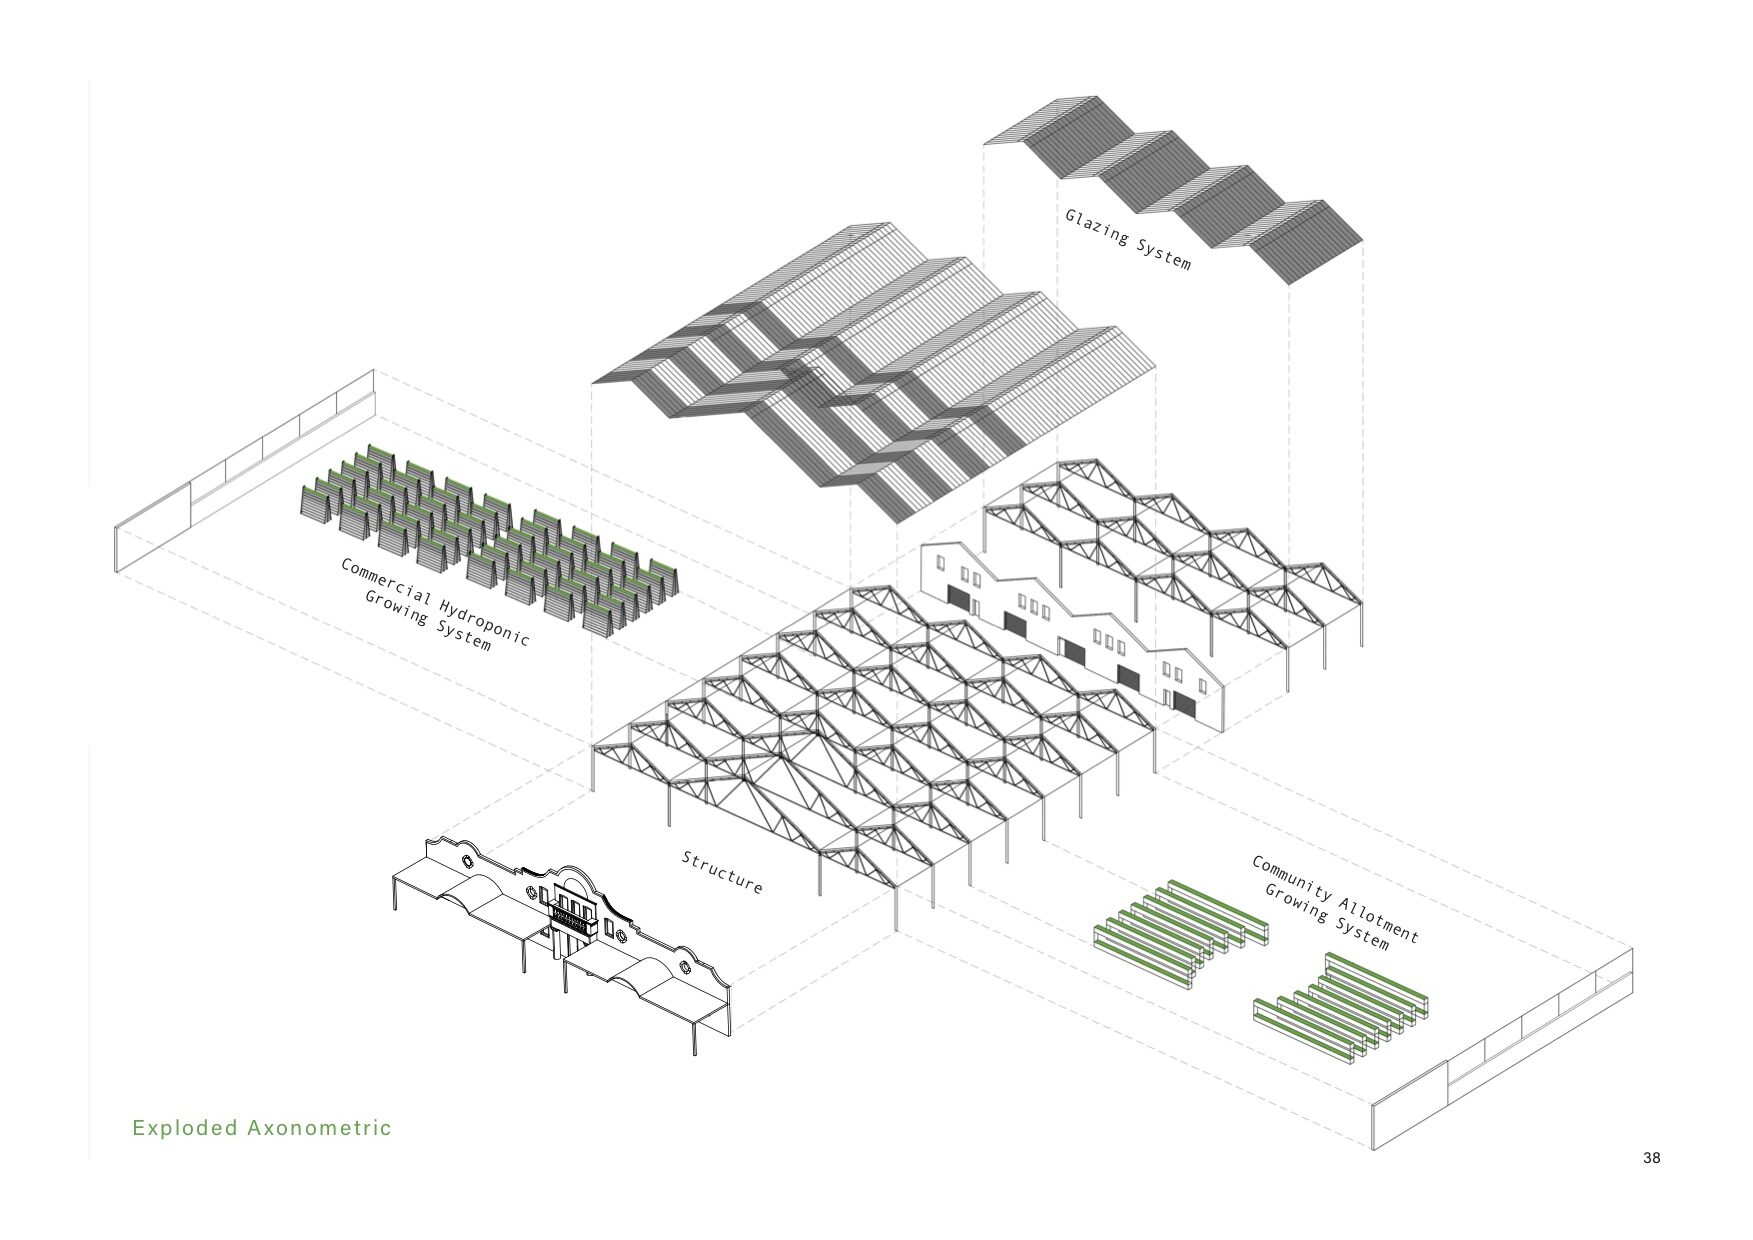 an axonometric drawing showing the structure, glazing systems and hydroponic growing systems